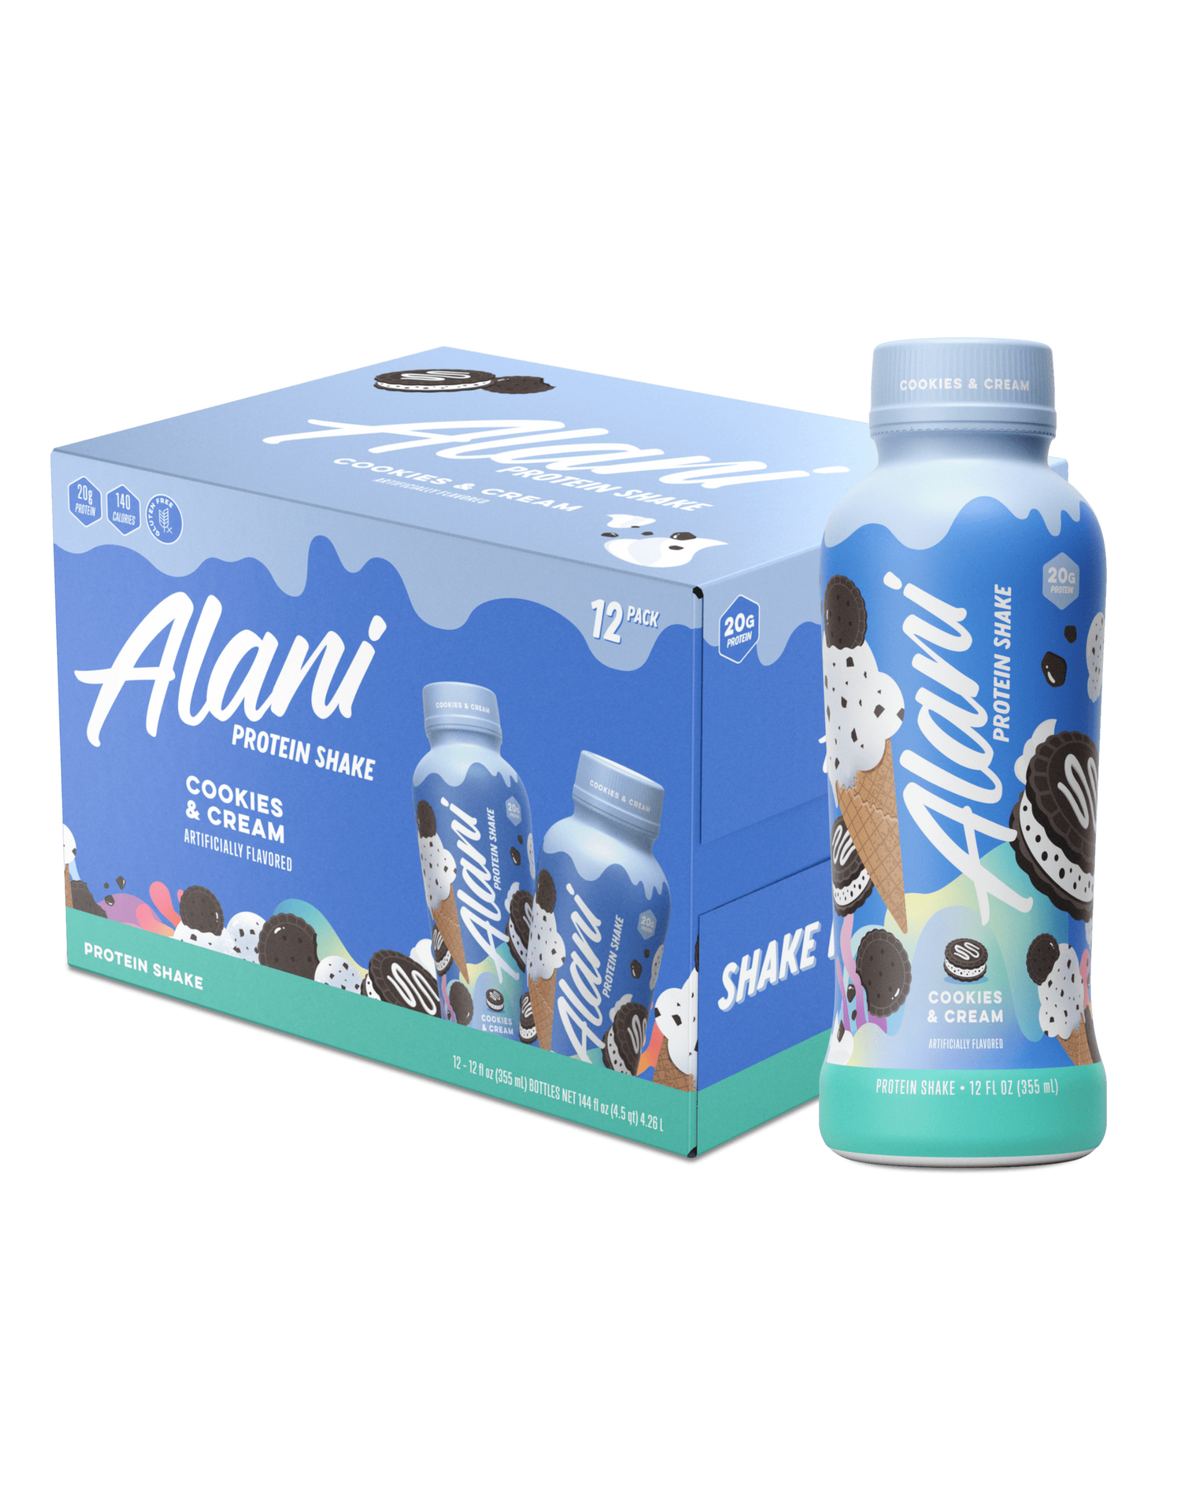 12 pack box of Alani Nu Protein Shake in Cookies &amp; Cream flavor.